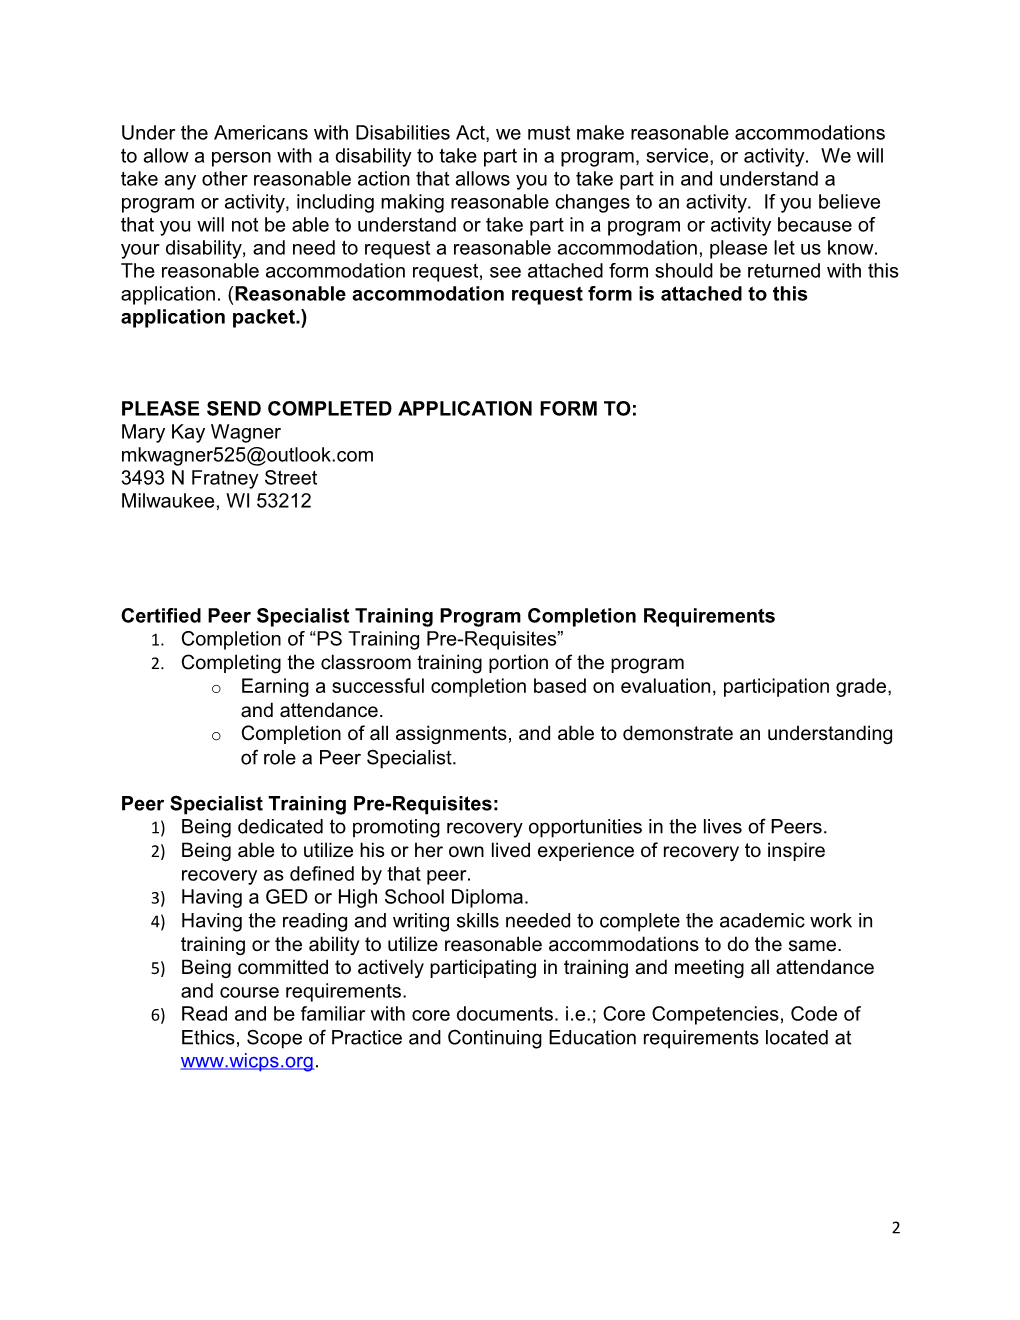 Wisconsin S Required Application for Peer Specialist Training